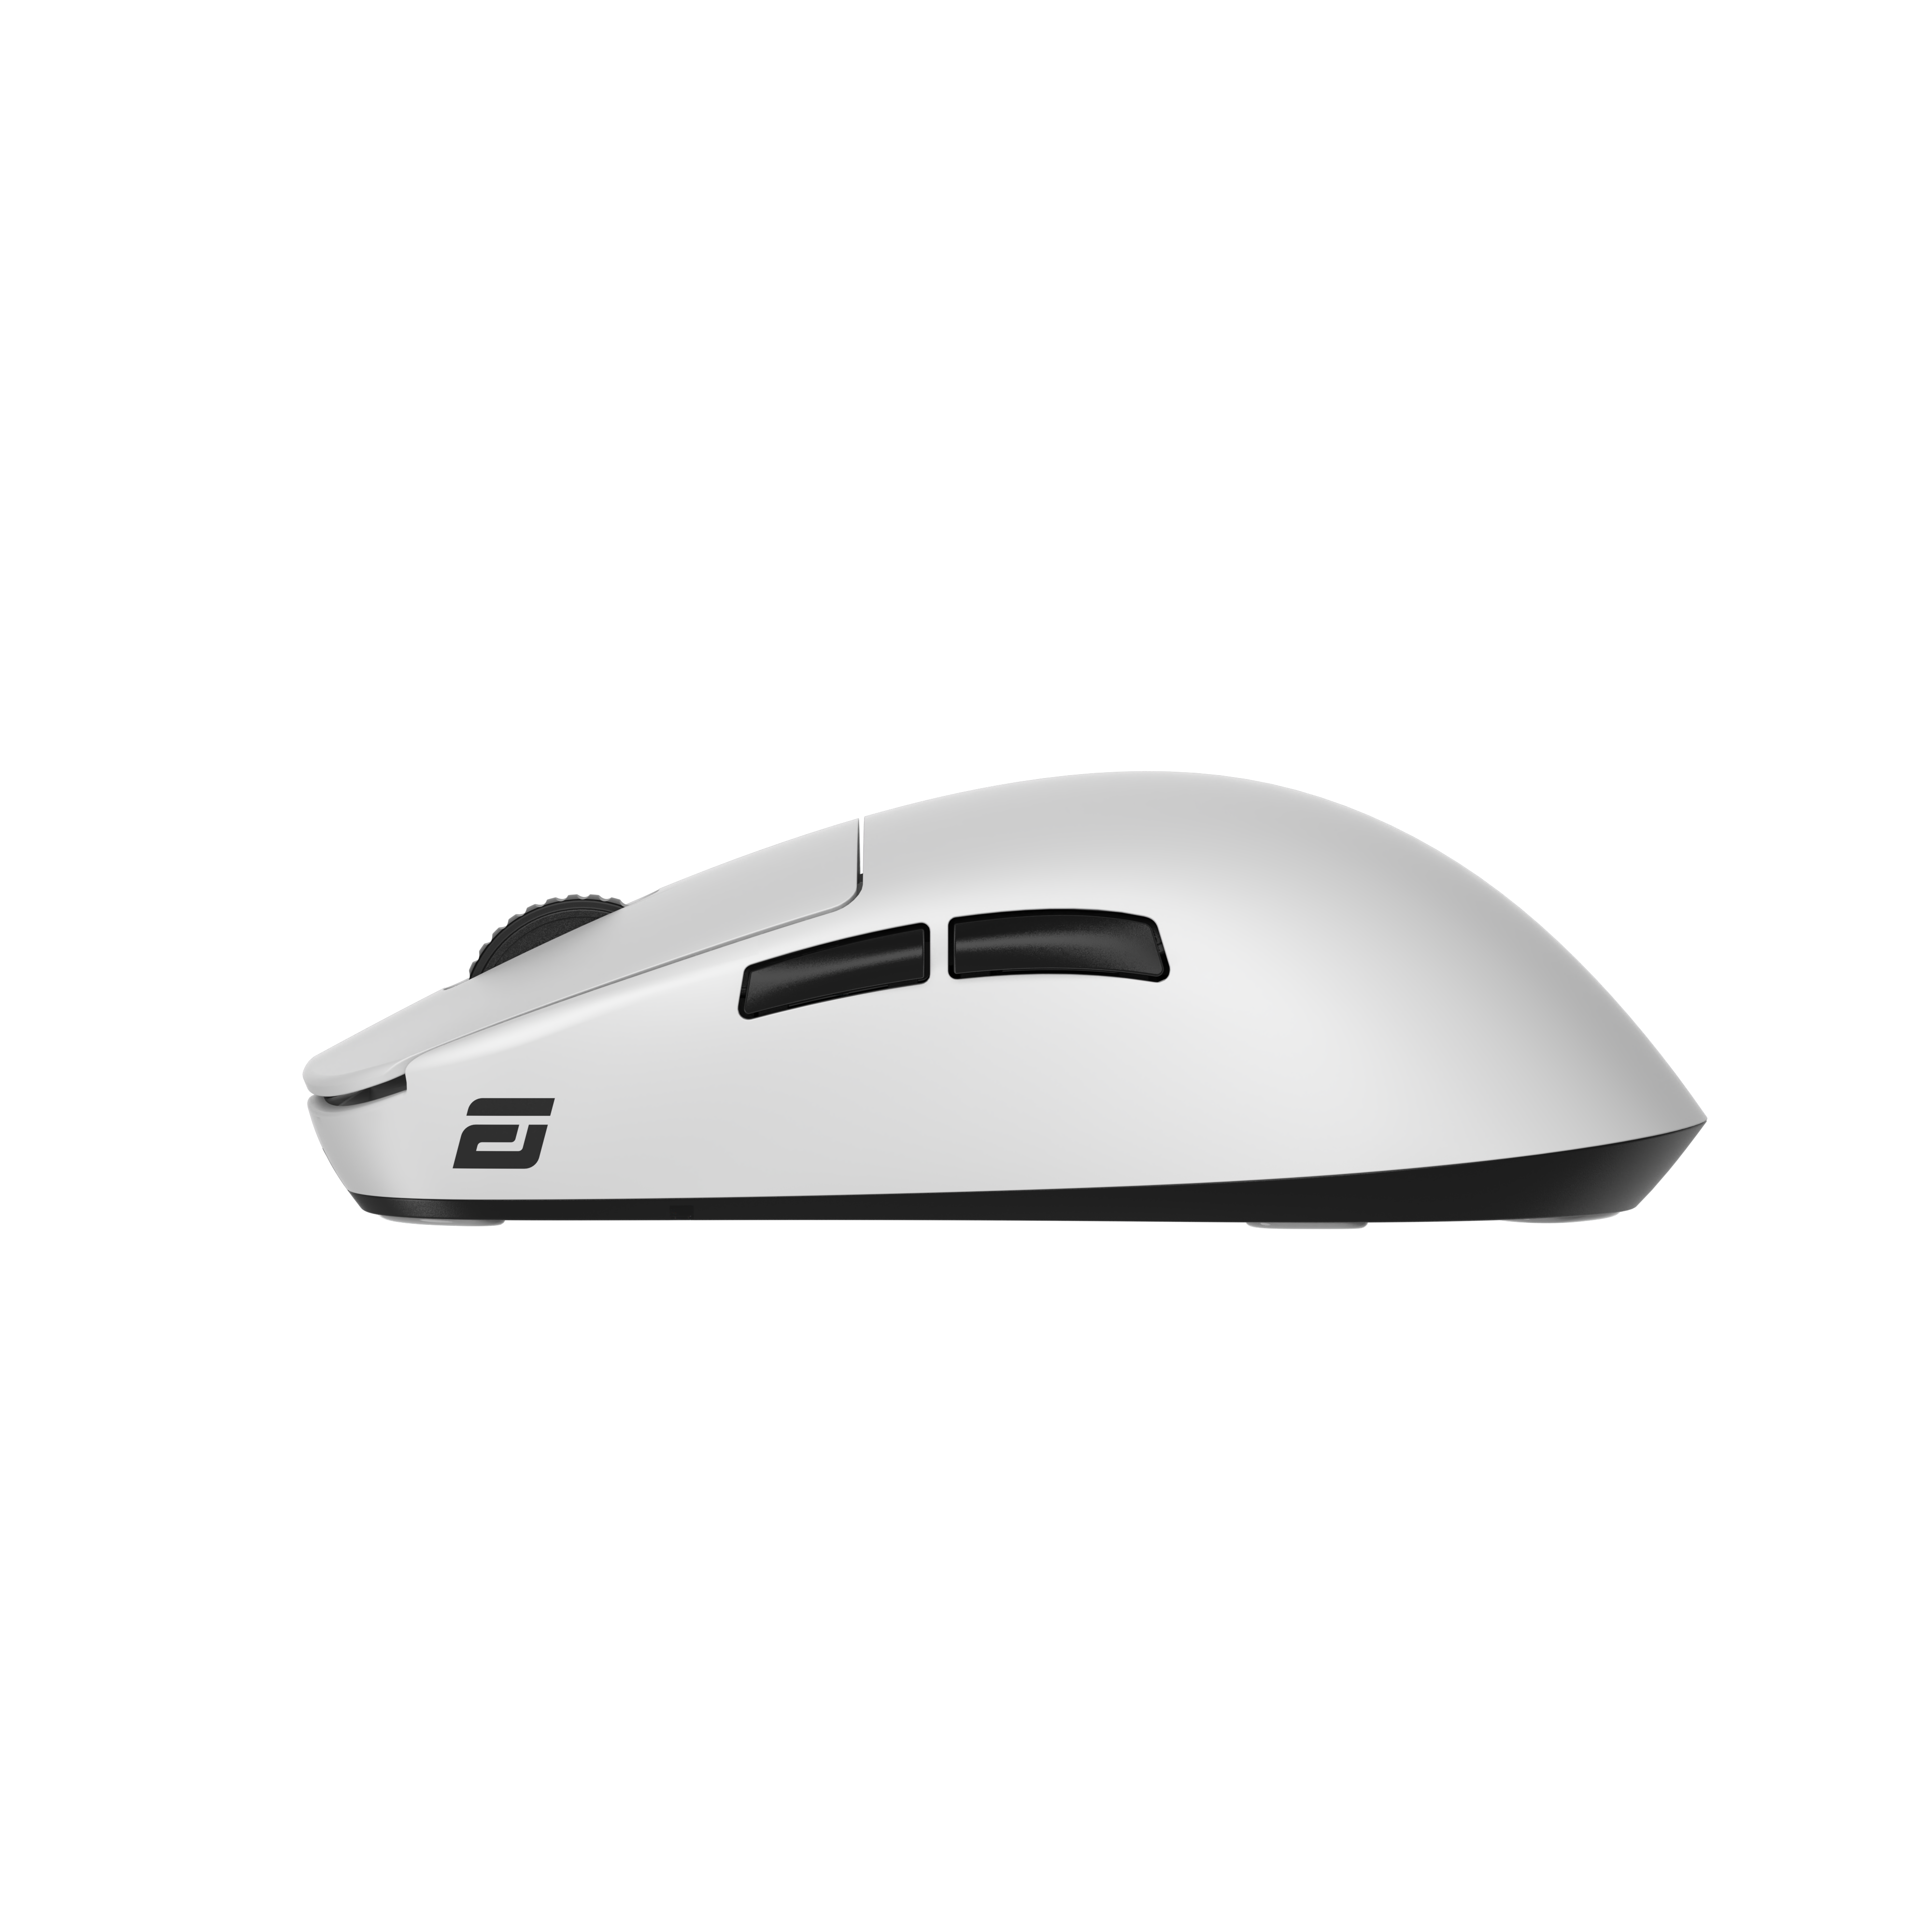 Endgame Gear - Endgame Gear OP1we Wireless Gaming Mouse - White